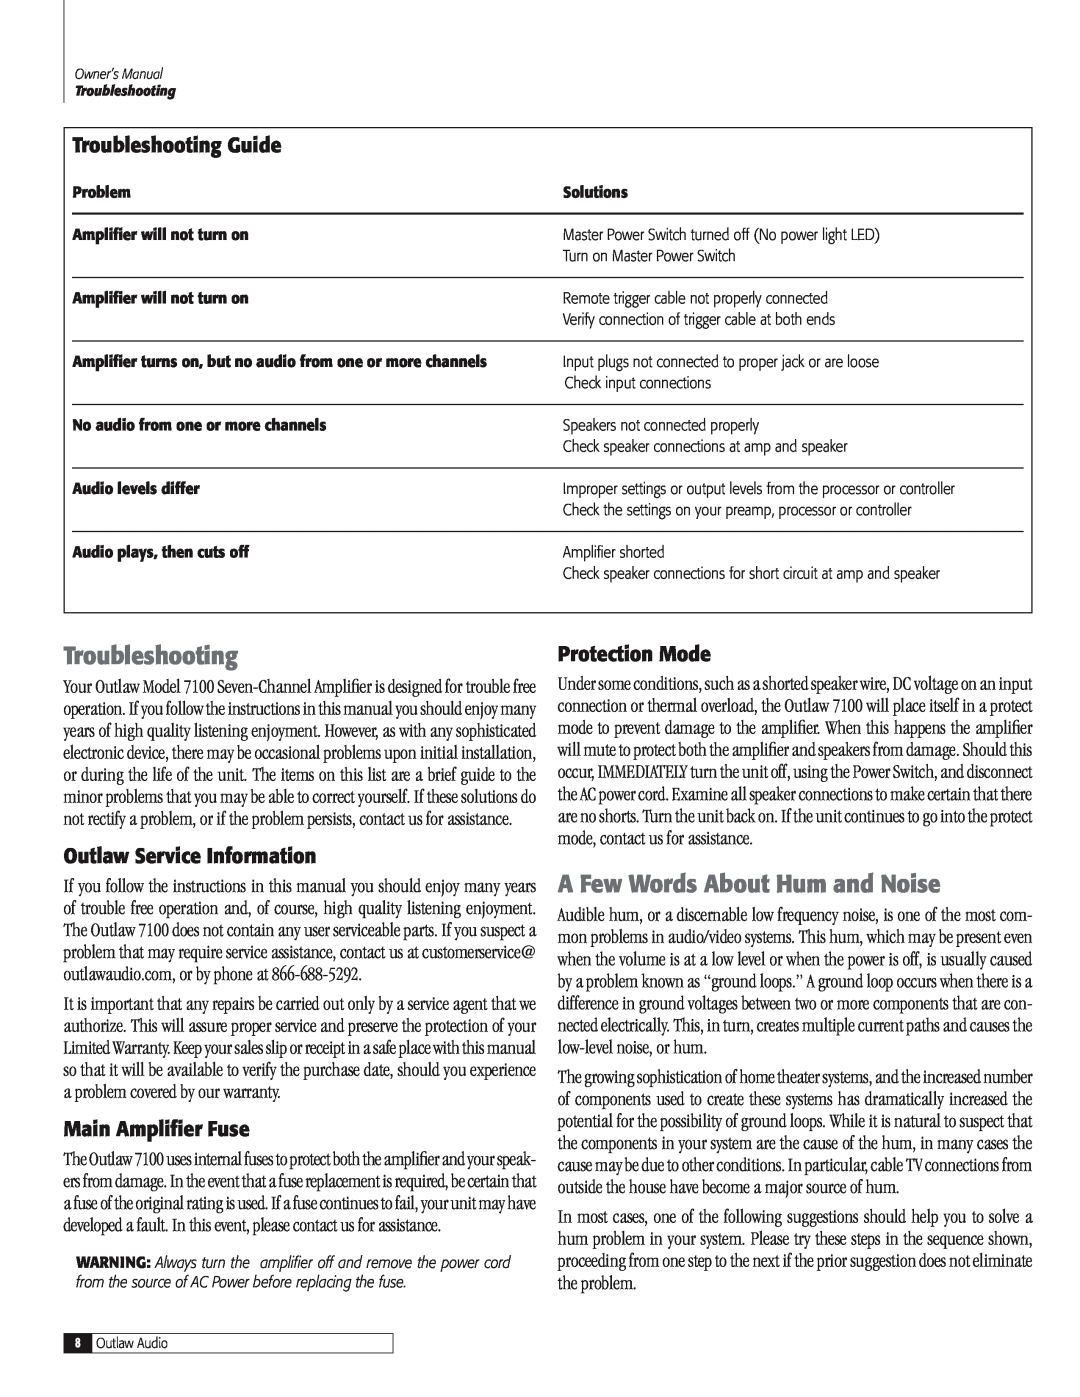 Outlaw Audio 7100 A Few Words About Hum and Noise, Troubleshooting Guide, Outlaw Service Information, Protection Mode 